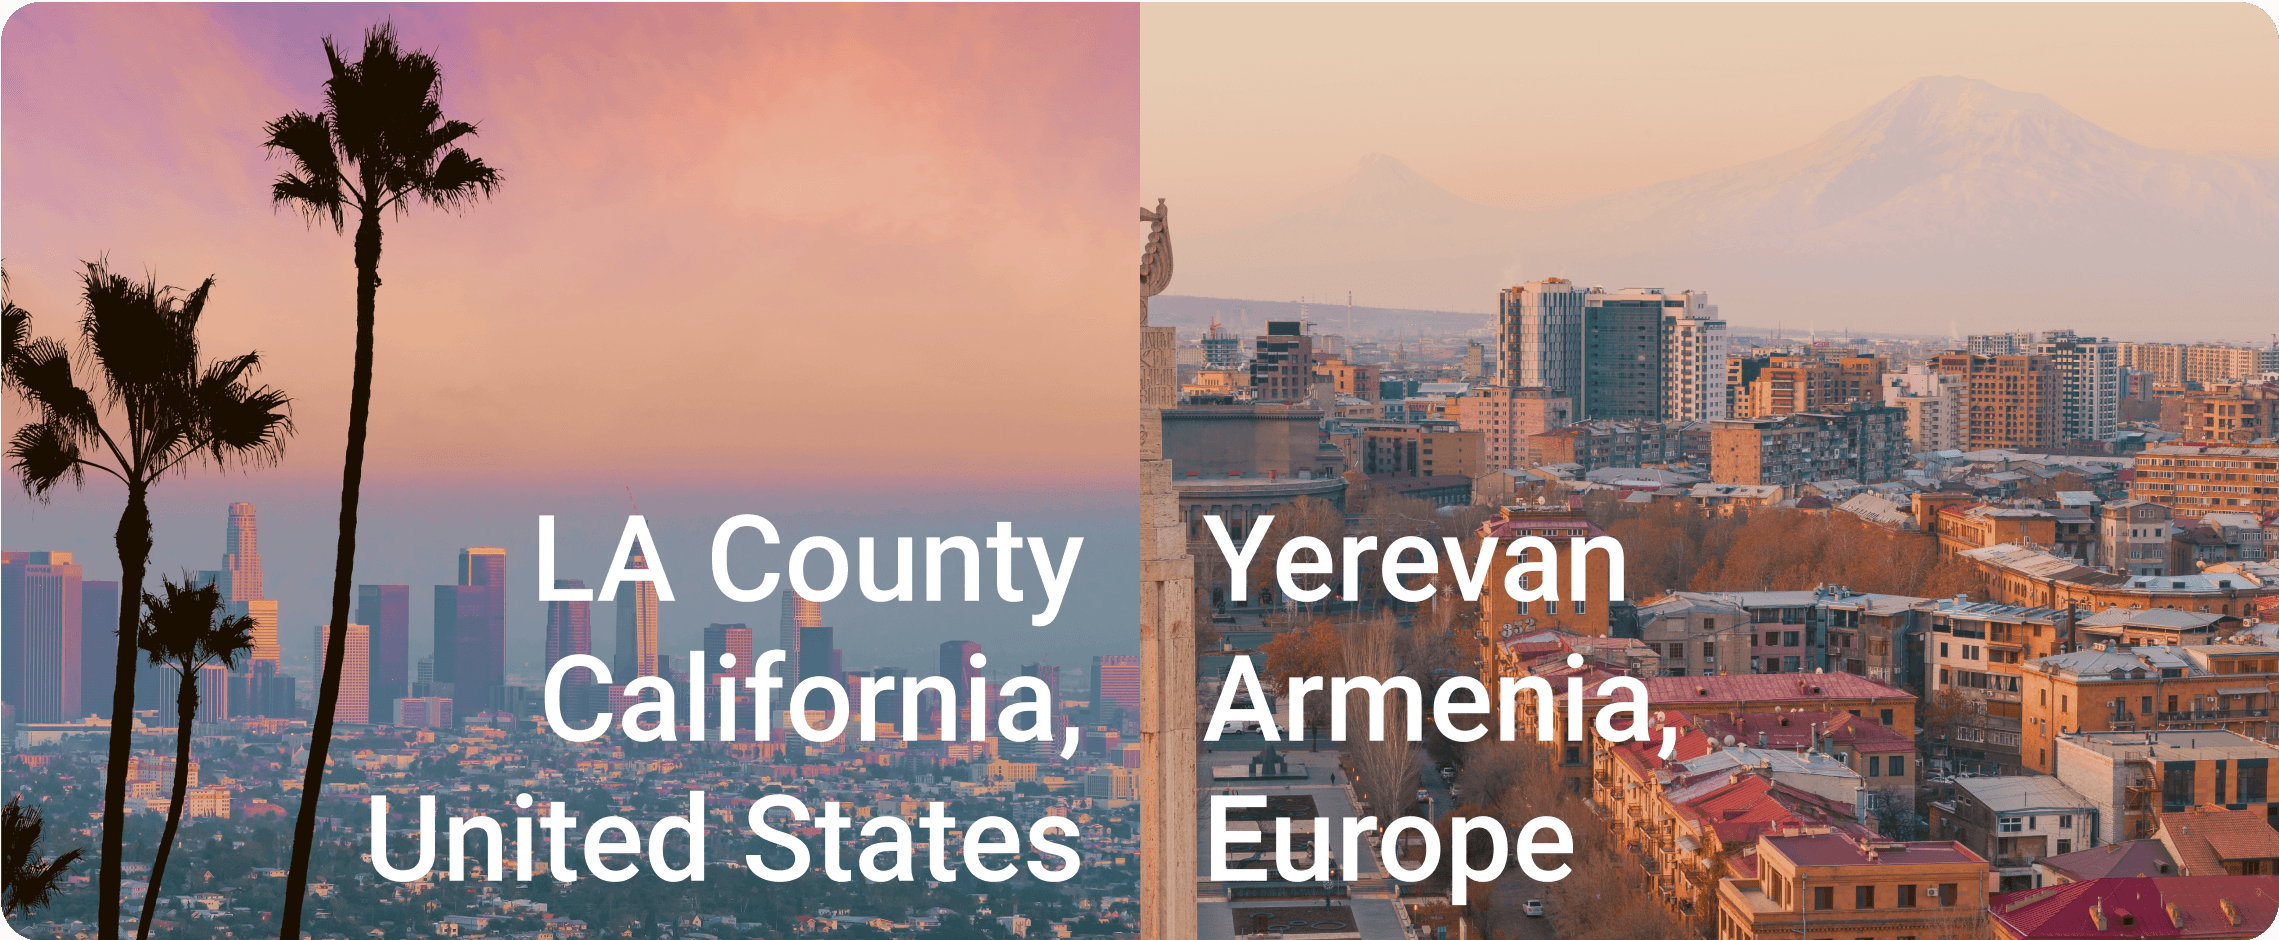 Pictures of Los Angeles, CA, and Yerevan, Armenia in one image.